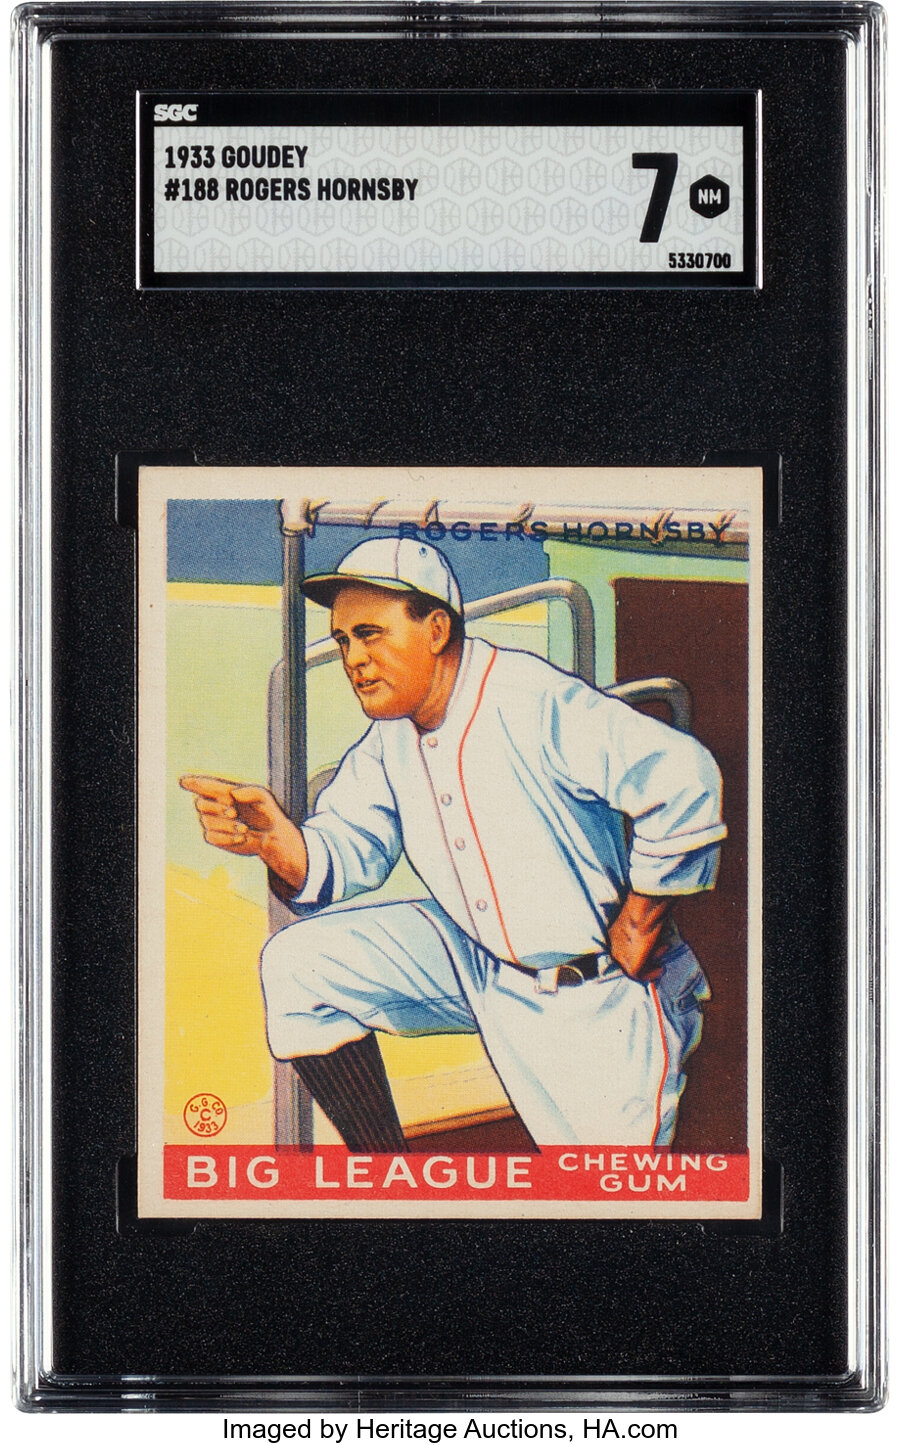 1933 Goudey Rogers Hornsby #188 SGC NM 7